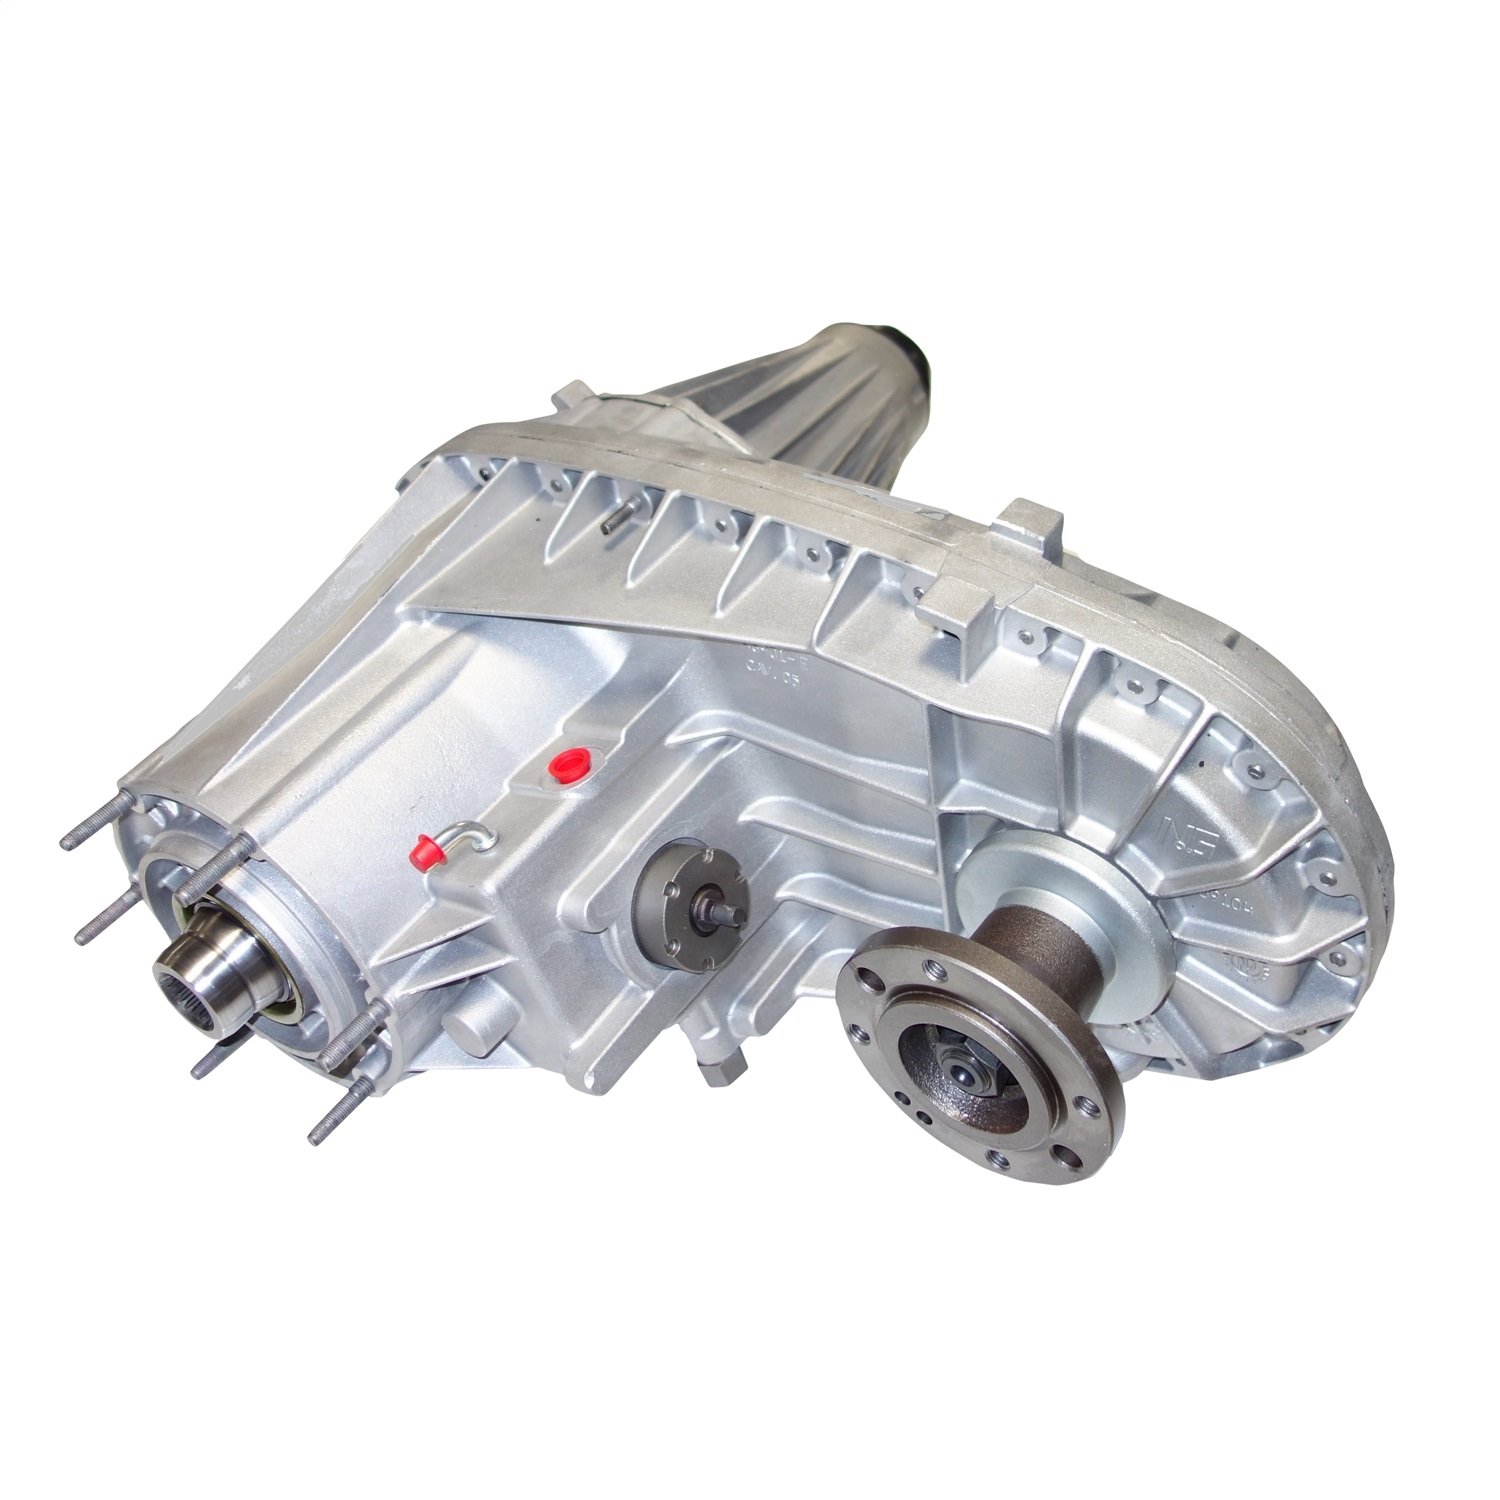 Remanufactured Transfer Case for Various Ram 2500/3500 with Exposed 23 Spline Input, 7/8 Hex